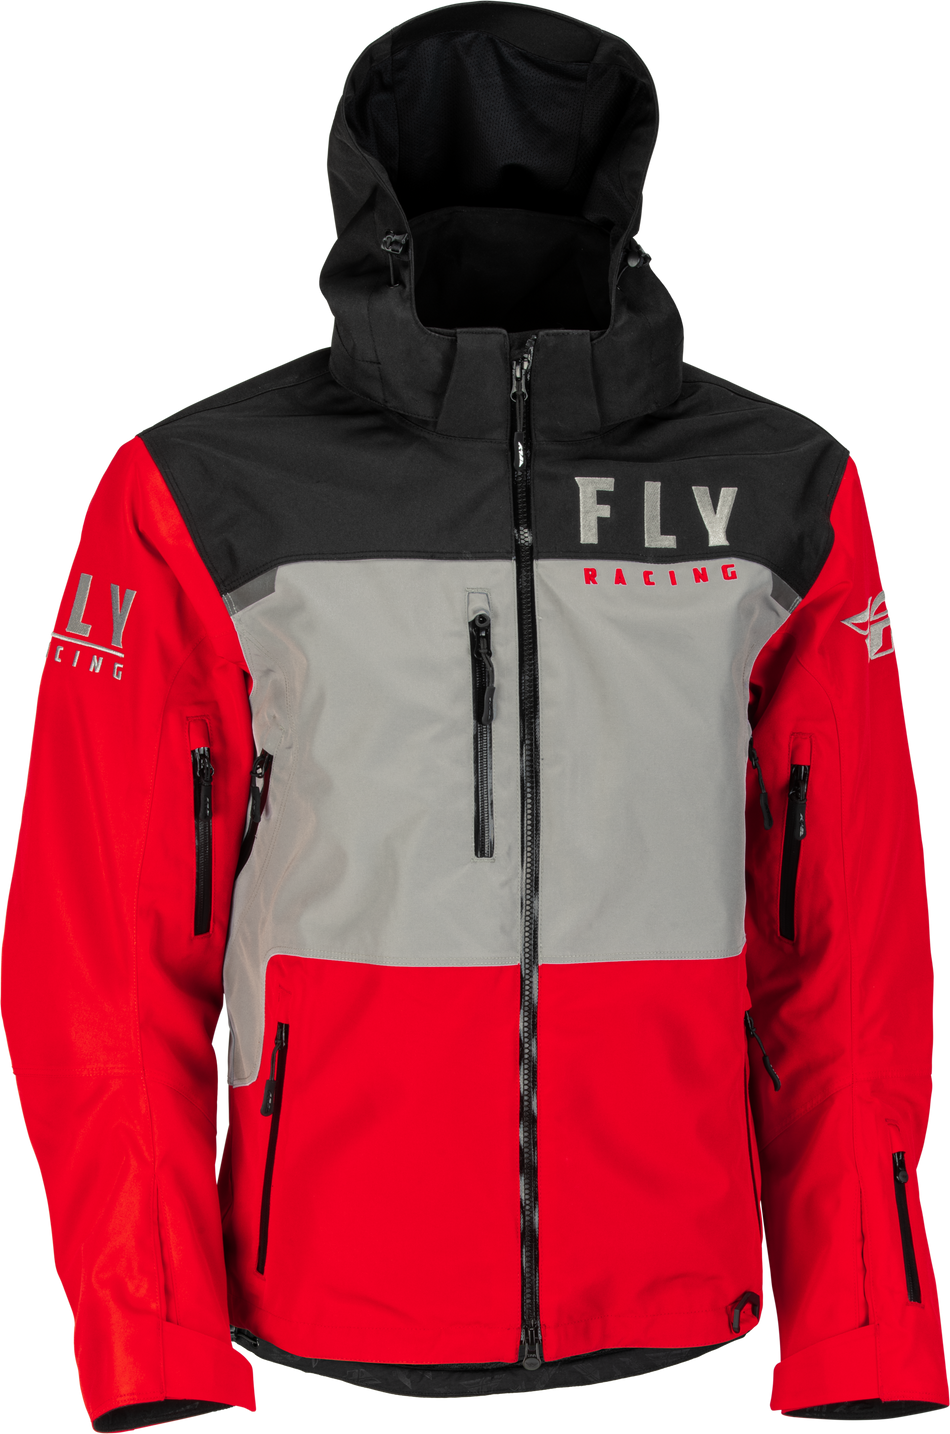 FLY RACING Carbon Jacket Red/Grey Xl 470-4134X